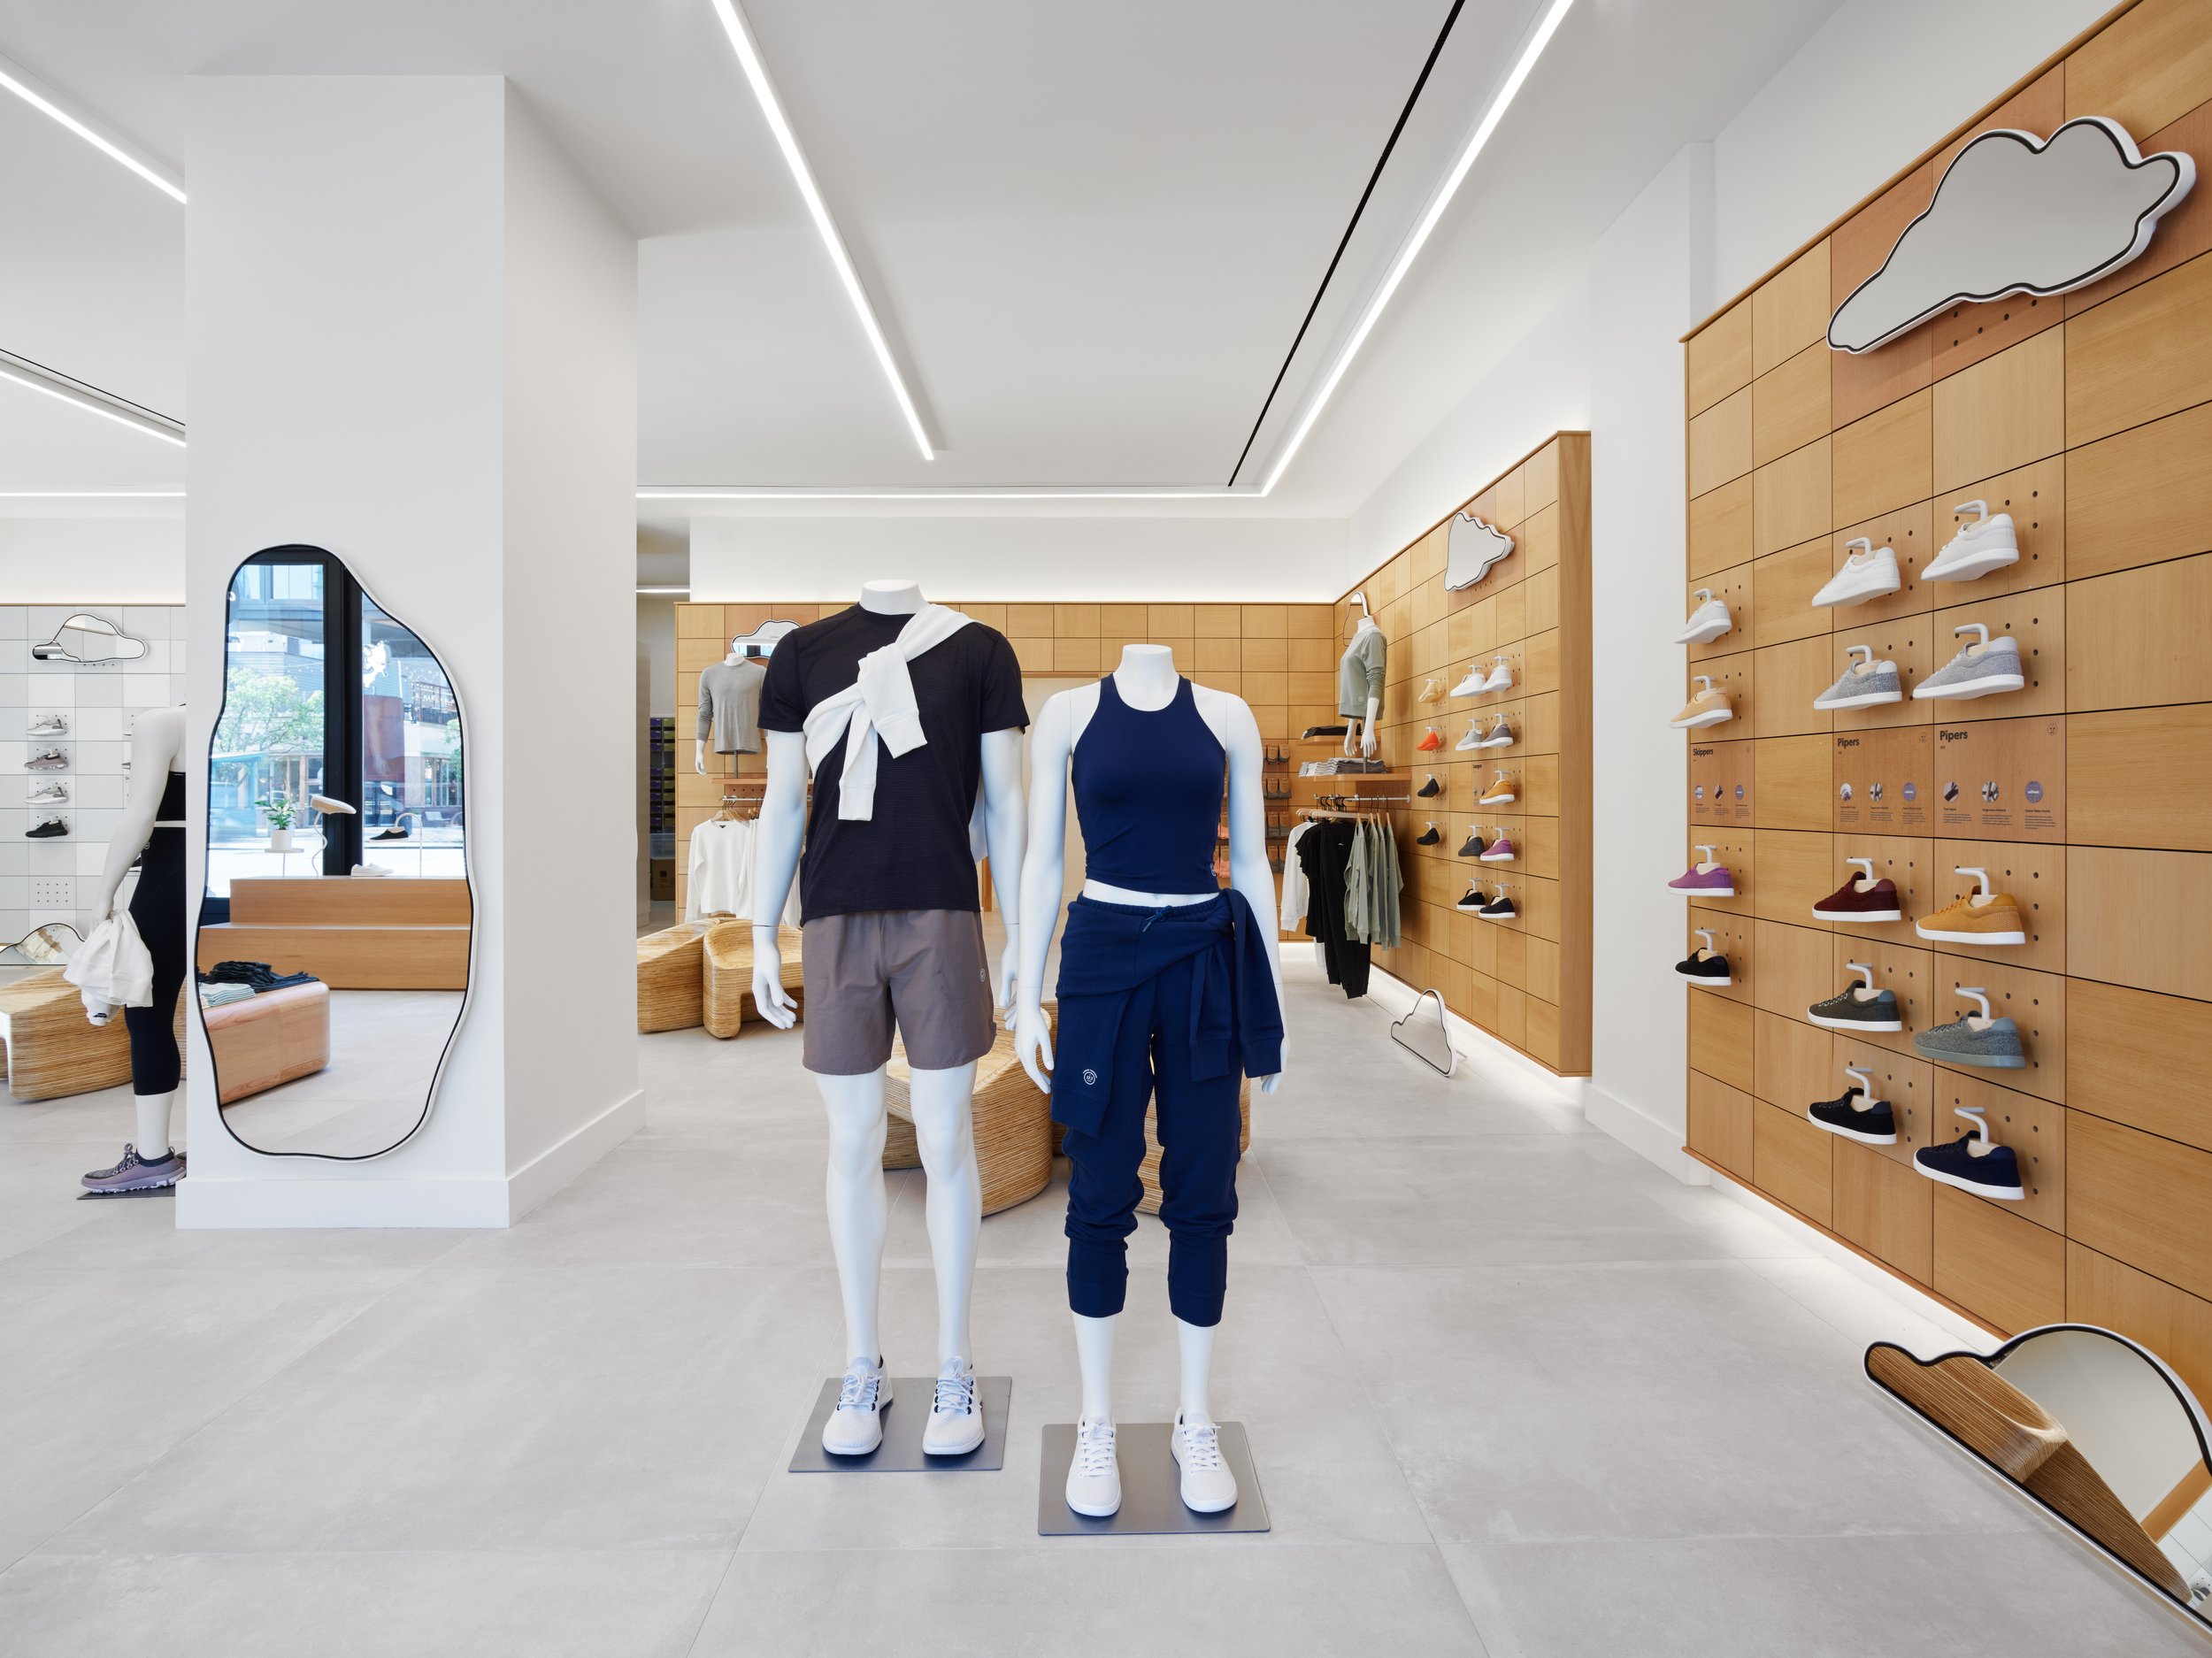  Allbirds Chicago interior and architecture retail storefront photography  